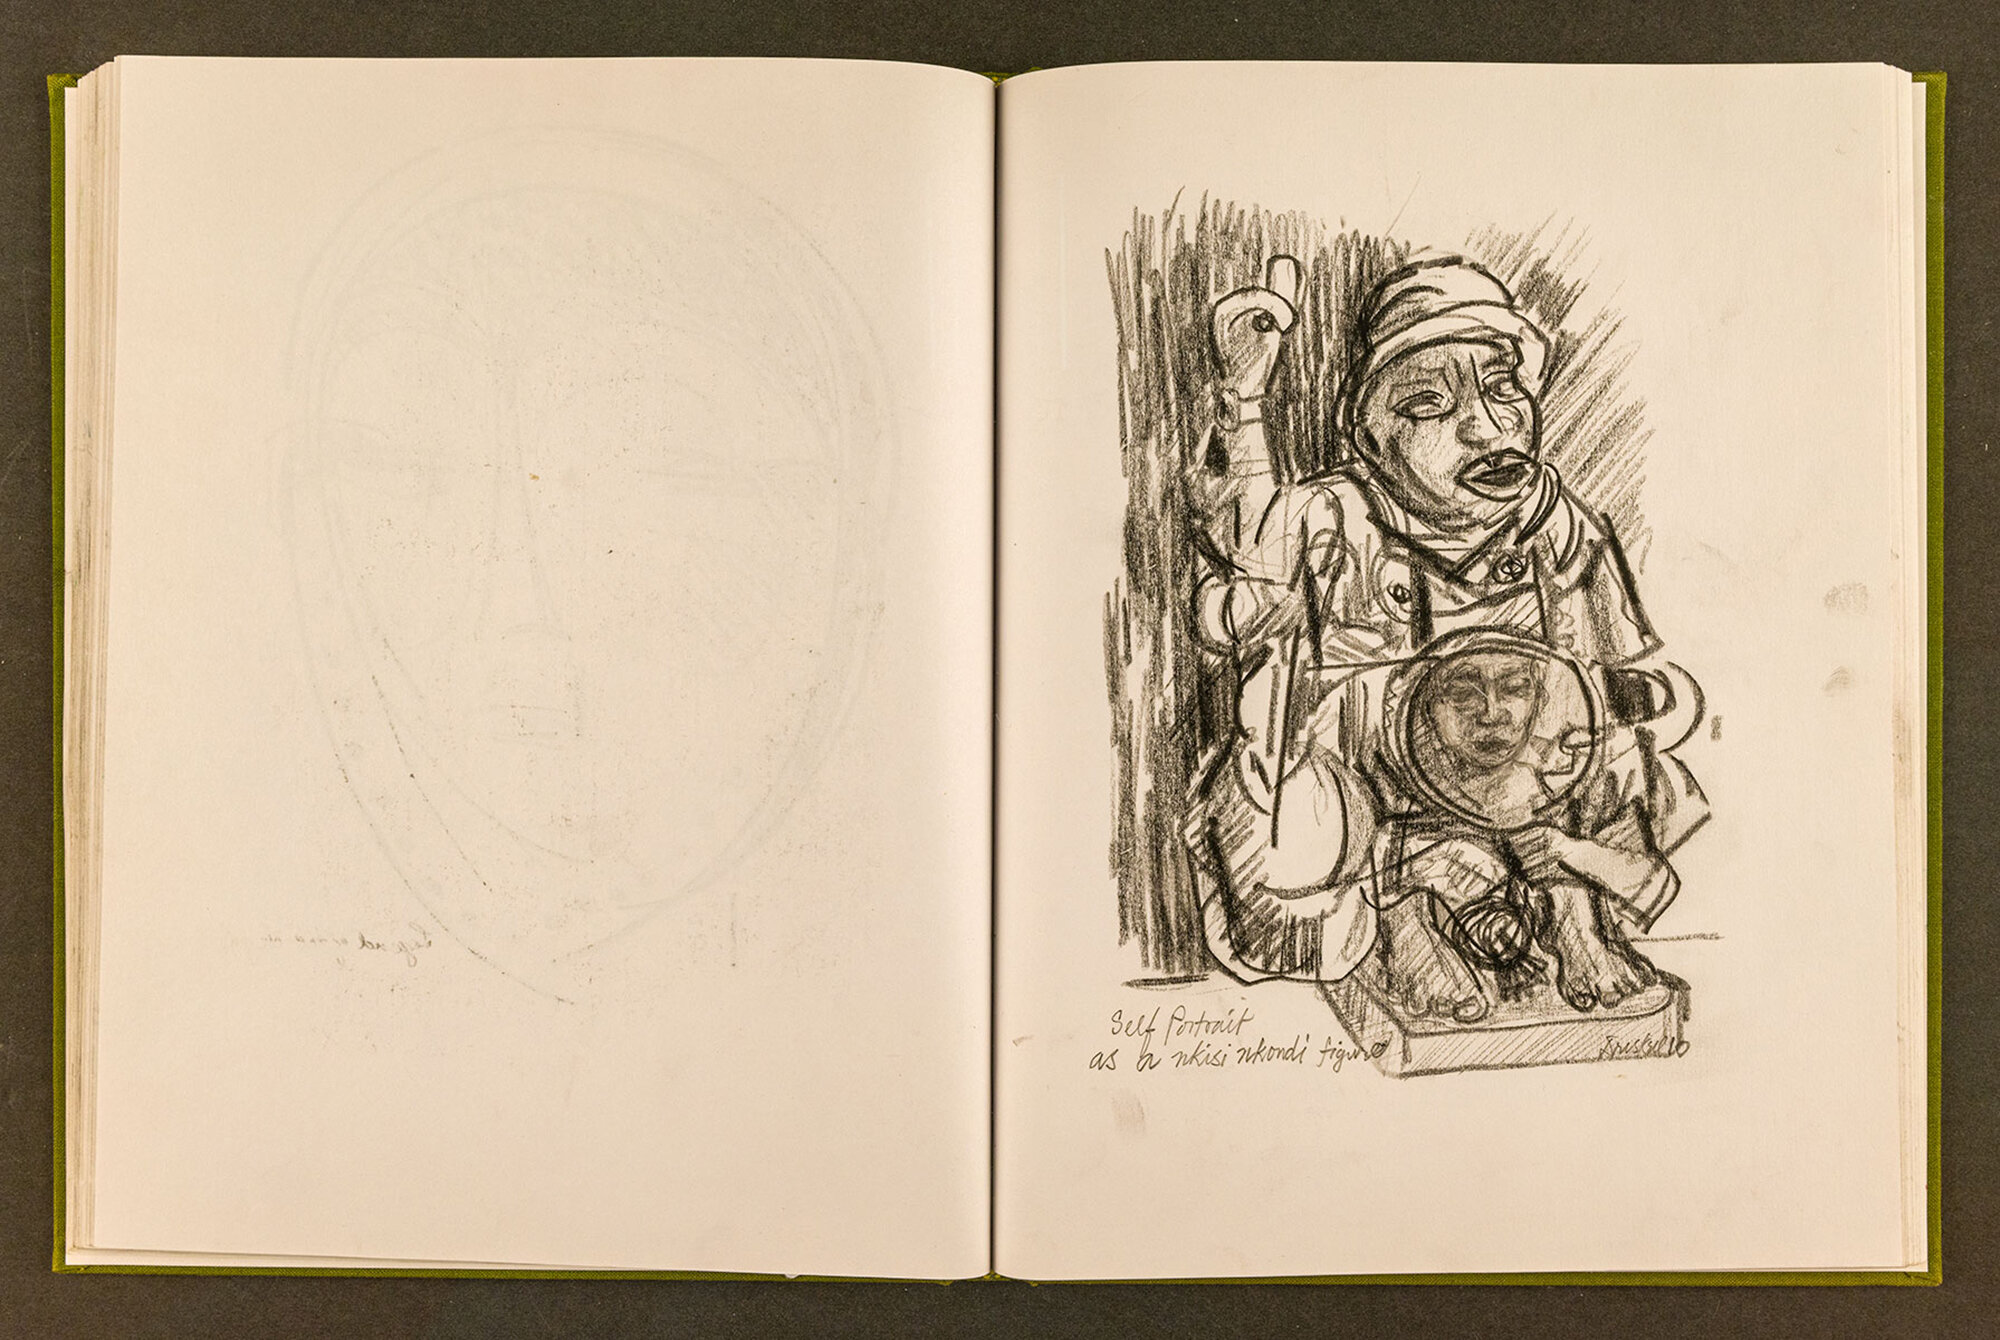  David C. Driskell (United States, 1931–2020),  Self-Portrait as a Nkisi Nkondi Figure , circa 2010 ,  graphite, charcoal, mixed media drawing in sketchbook, approximately 11 x 8 1/2 inches. Collection of the Estate of David C. Driskell, Maryland. Ph